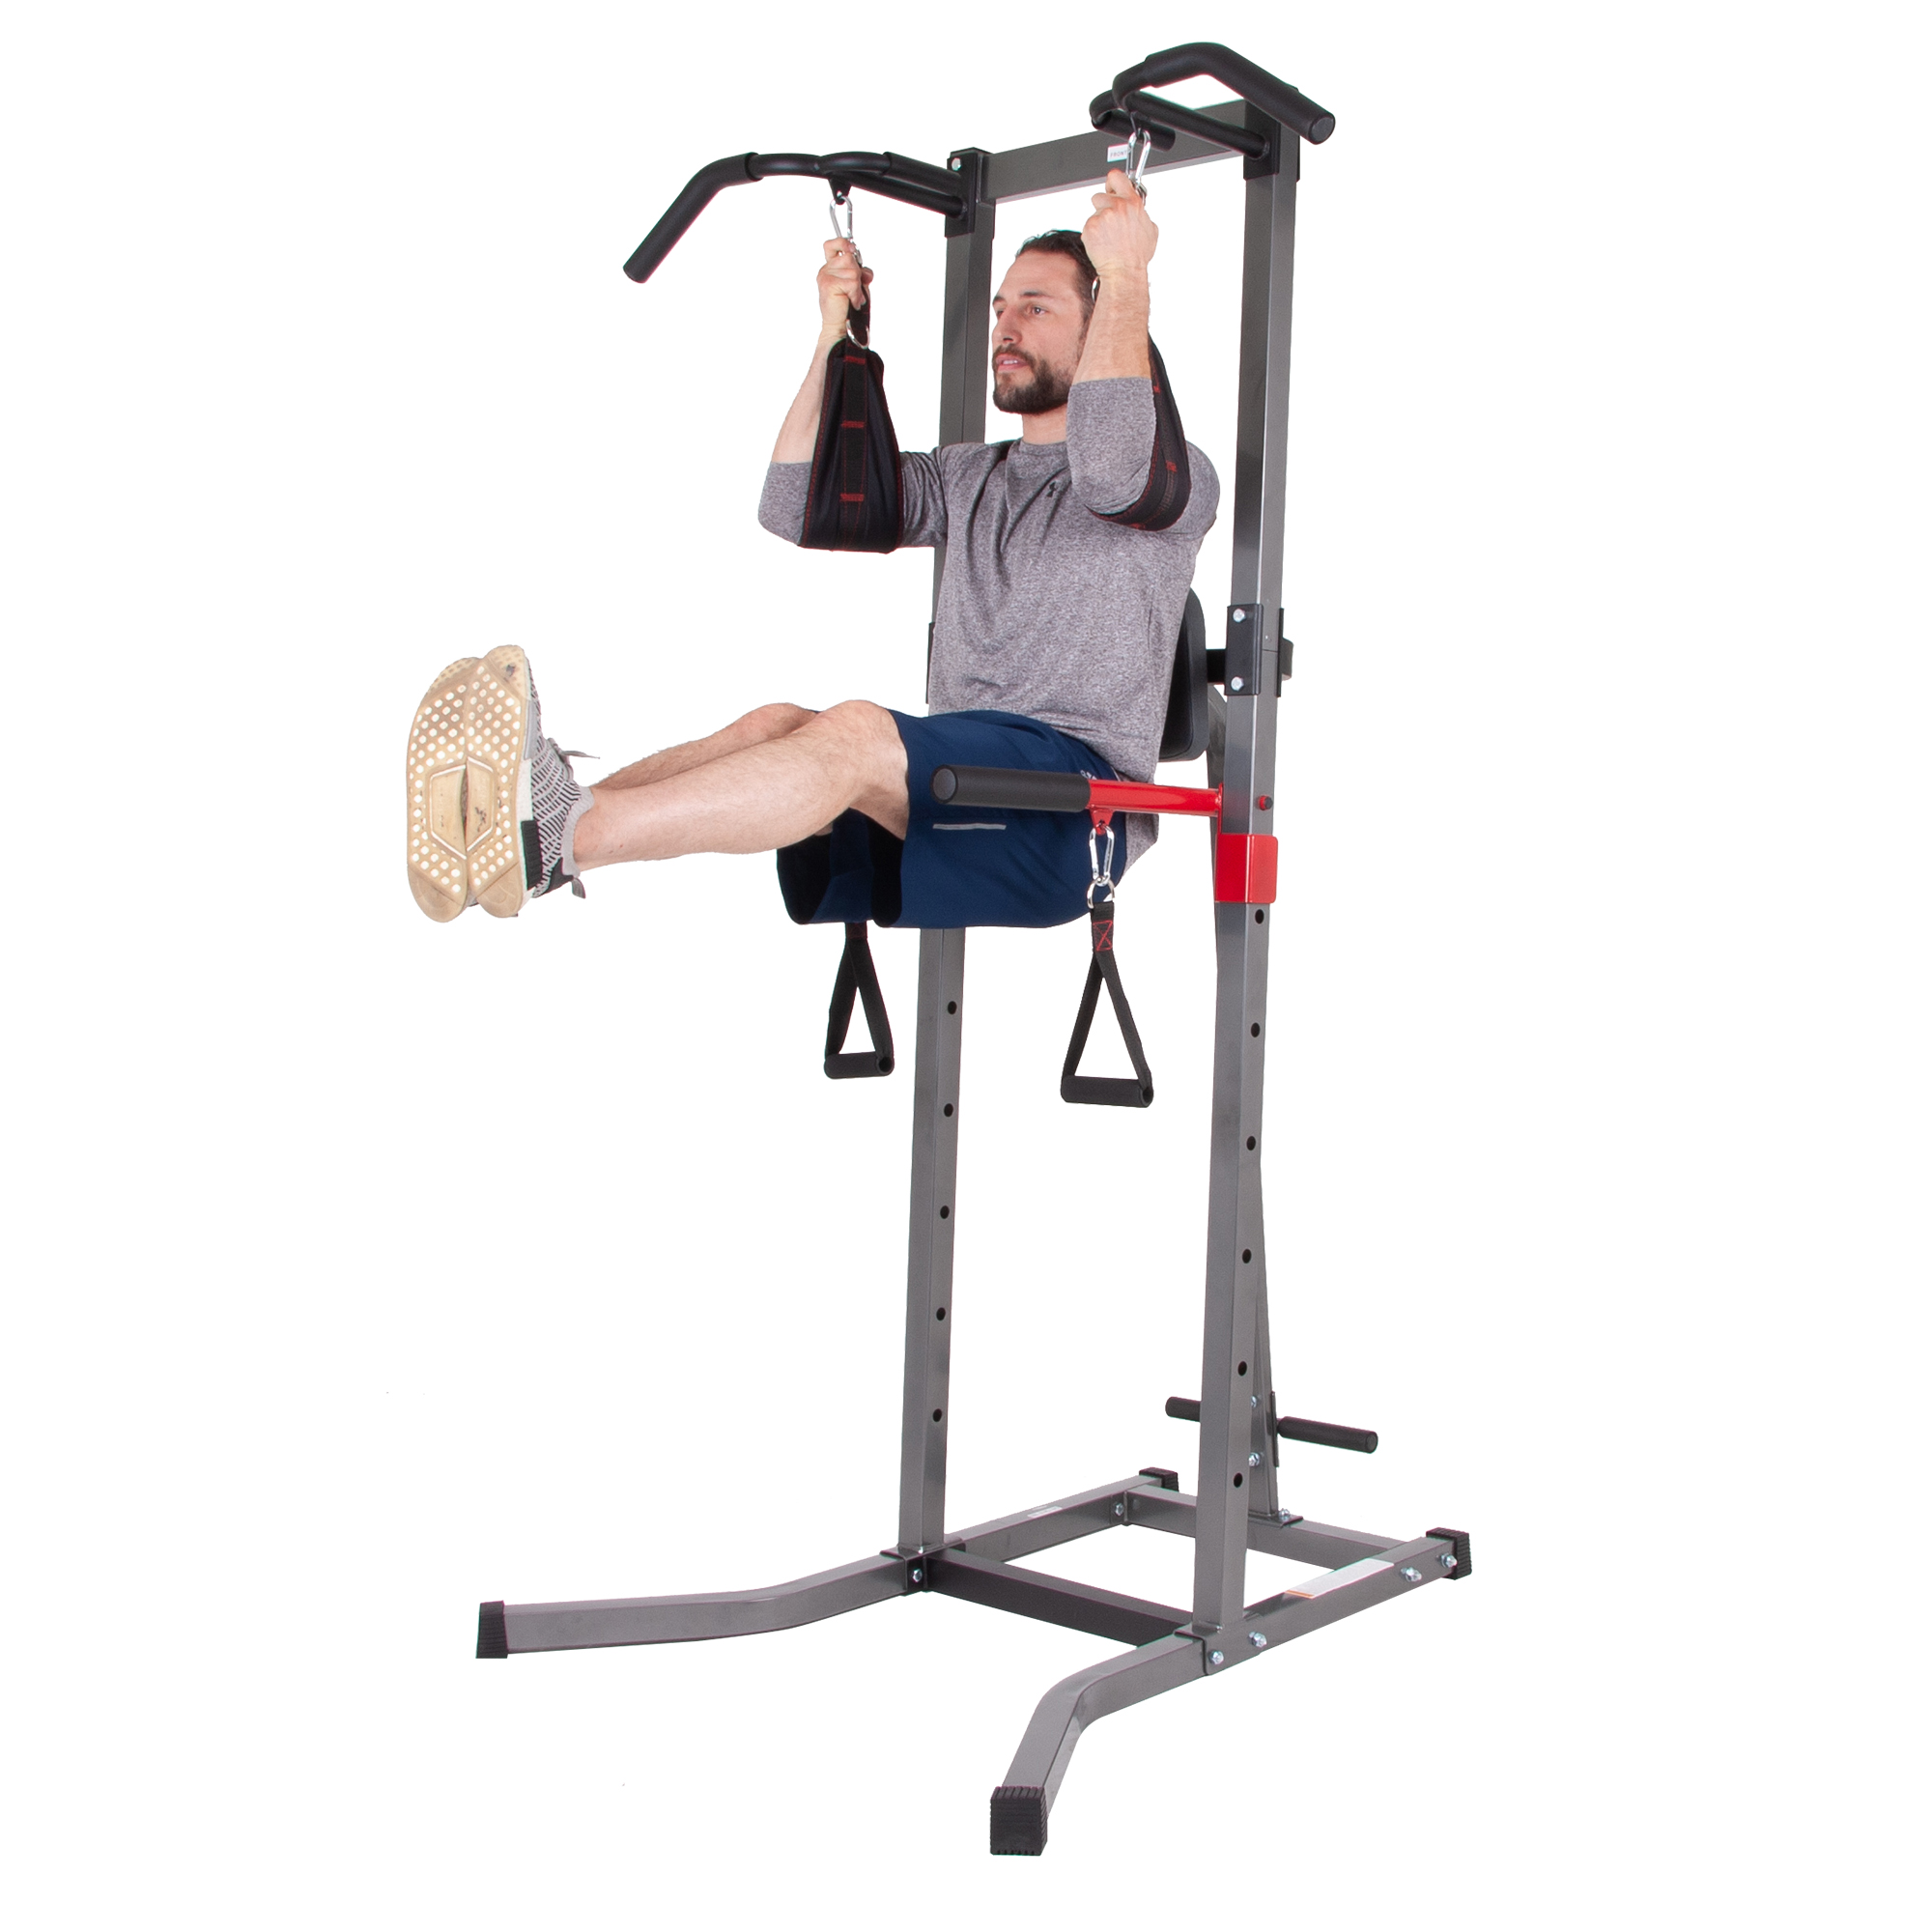 Body Champ VKR2078 5-in-1 Power Tower and Dip Station, Home Gym Equipment - image 2 of 9